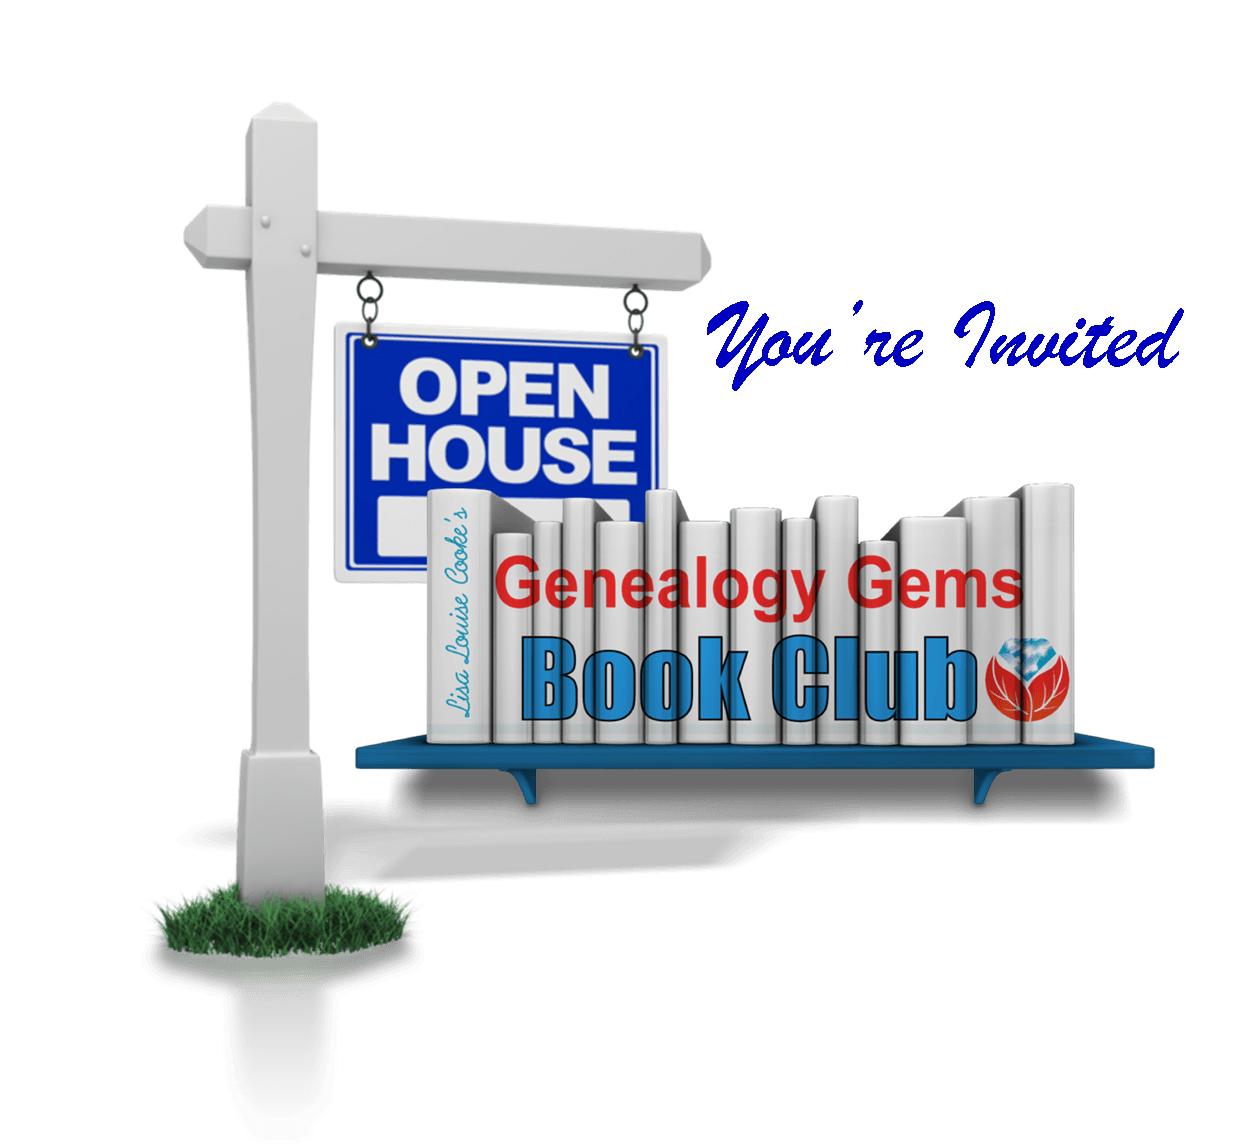 You’re Invited! Genealogy Gems Book Club Open House at RootsTech 2016